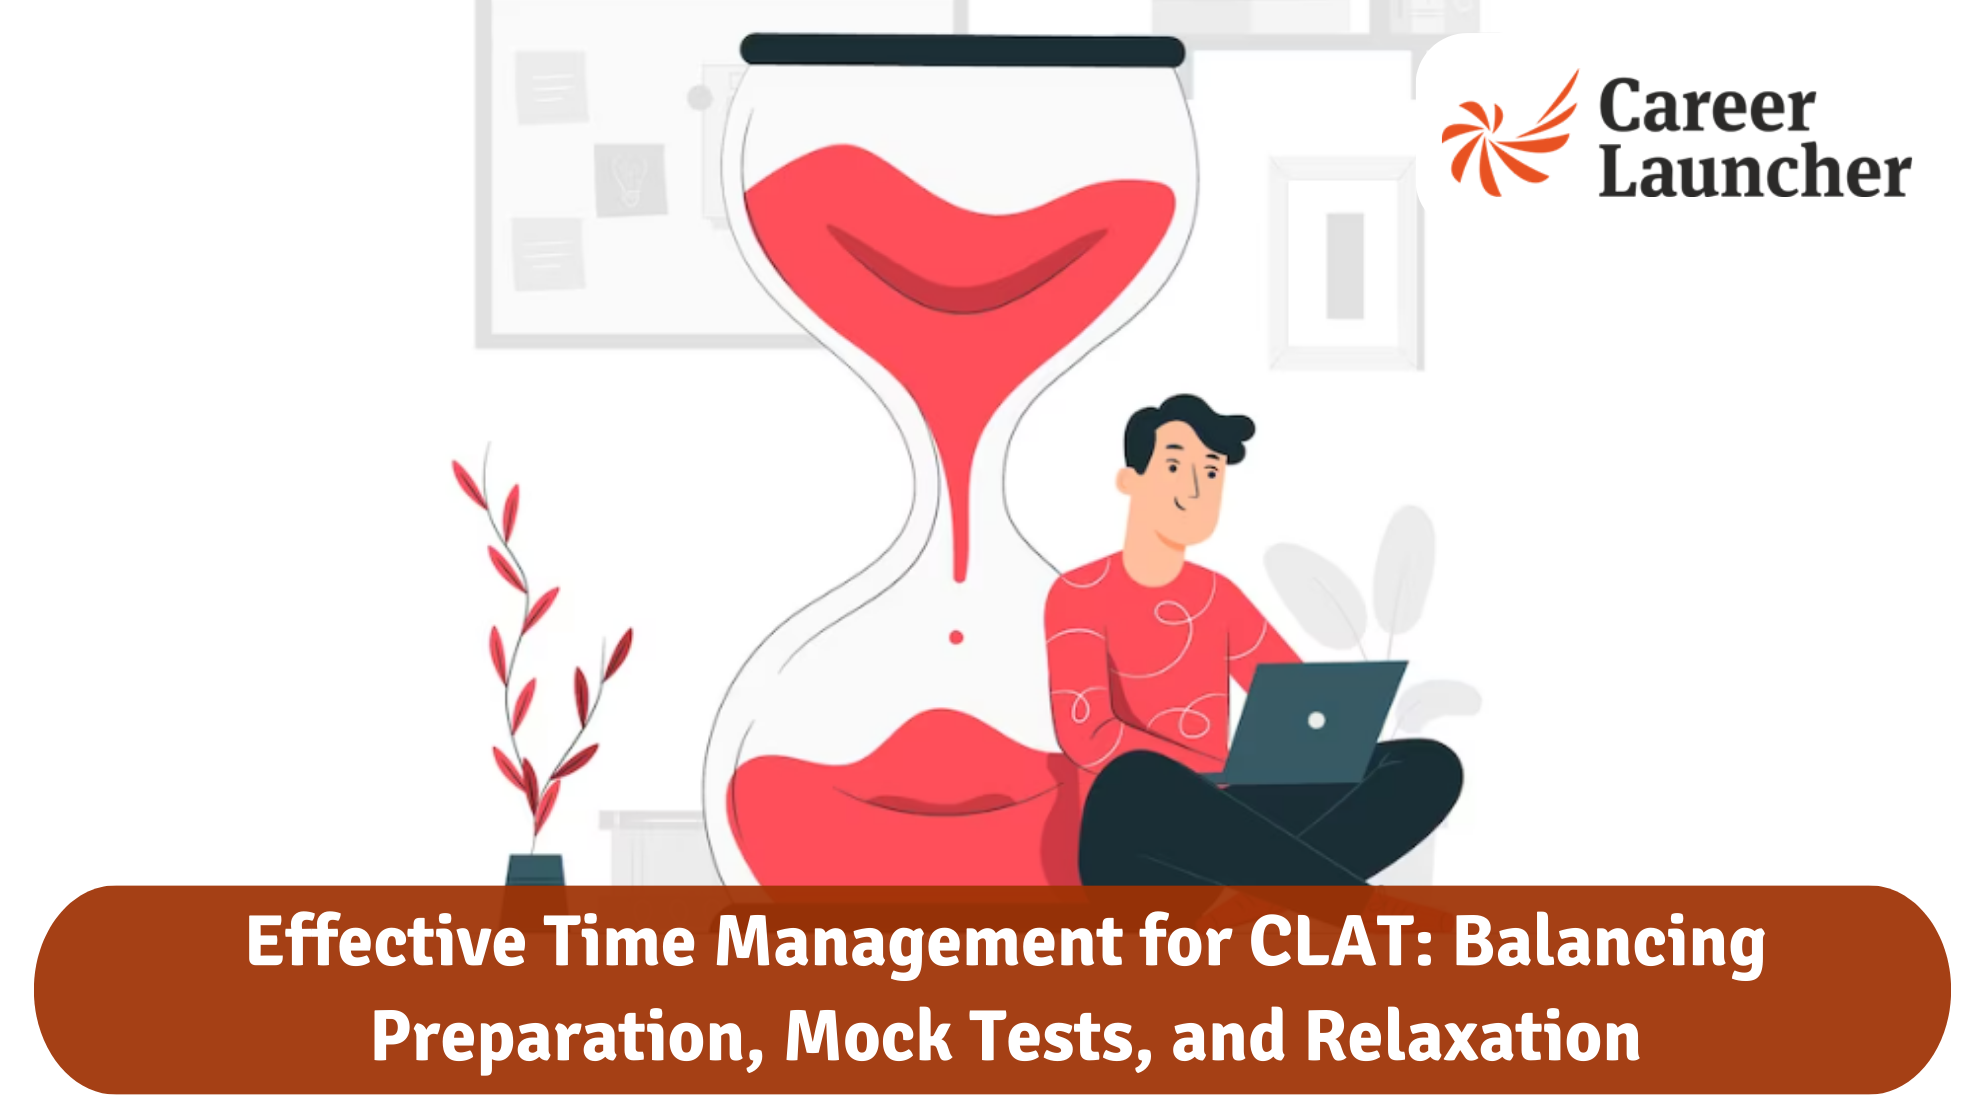 Effective Time Management for CLAT: Balancing Preparation, Mock Tests, and Relaxation